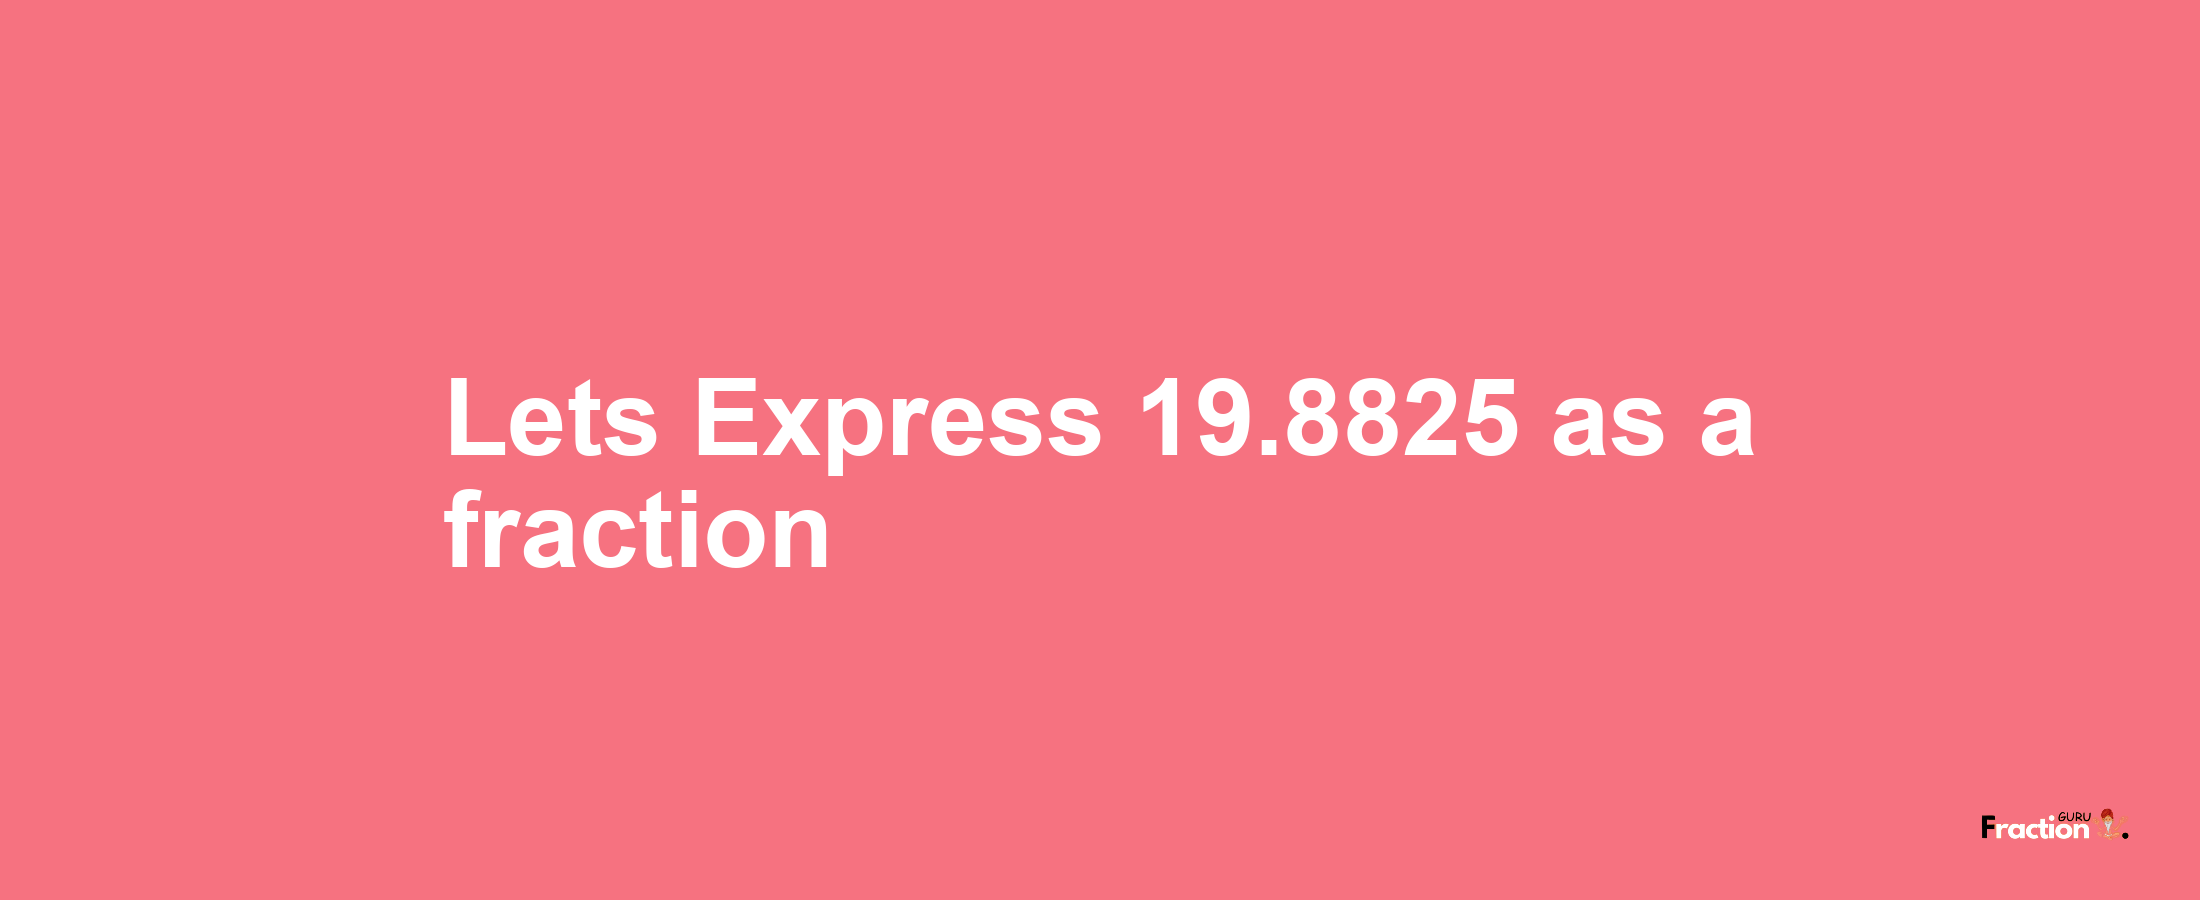 Lets Express 19.8825 as afraction